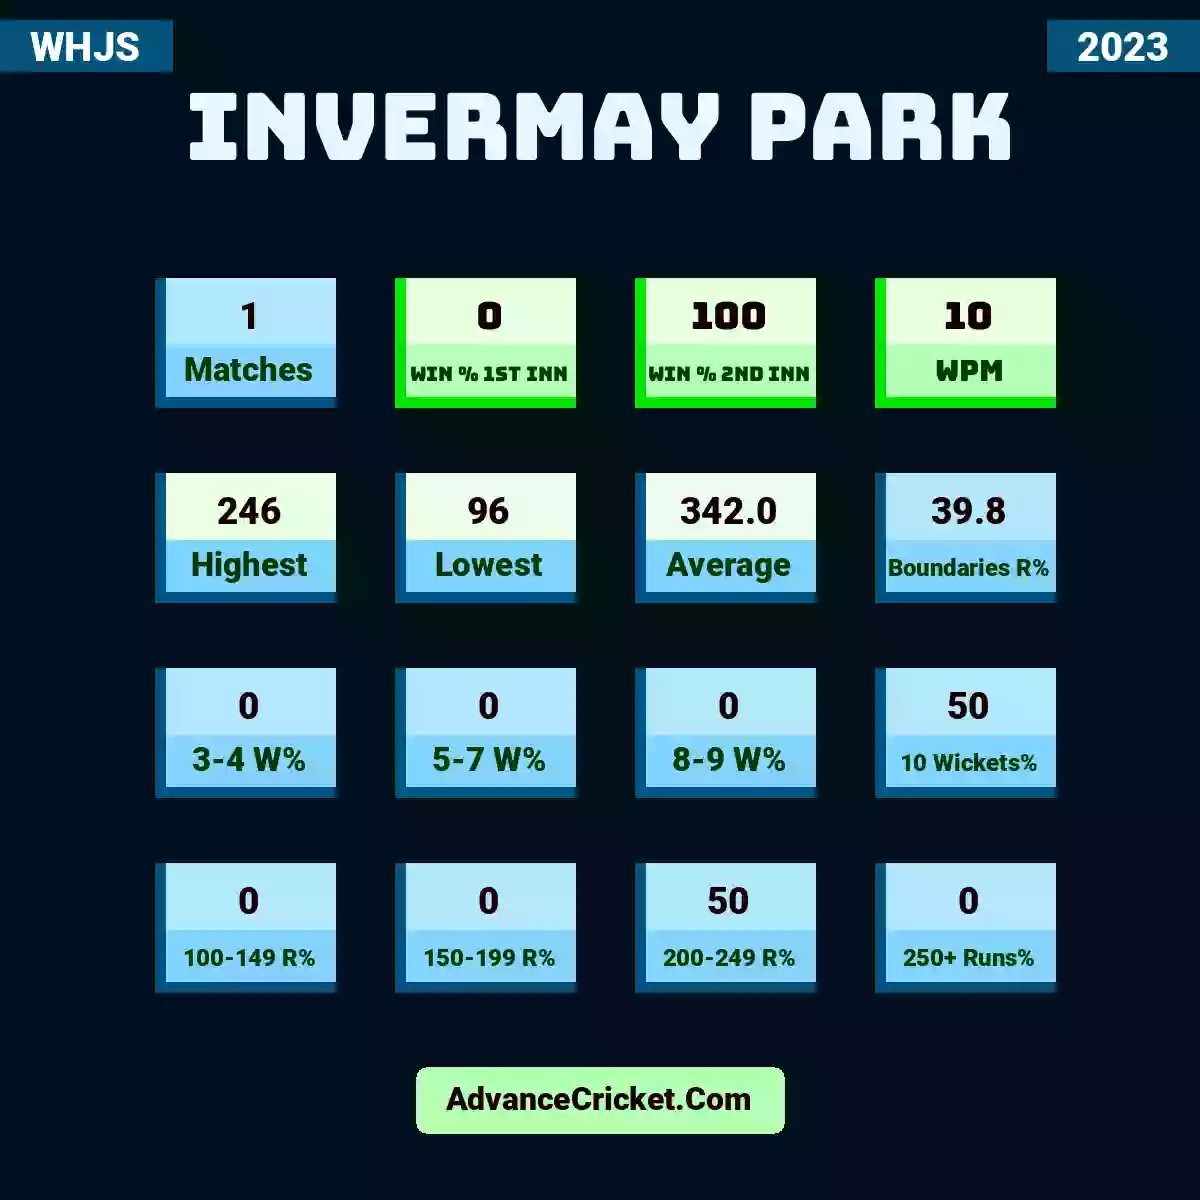 Image showing Invermay Park with Matches: 1, Win % 1st Inn: 0, Win % 2nd Inn: 100, WPM: 10, Highest: 246, Lowest: 96, Average: 342.0, Boundaries R%: 39.8, 3-4 W%: 0, 5-7 W%: 0, 8-9 W%: 0, 10 Wickets%: 50, 100-149 R%: 0, 150-199 R%: 0, 200-249 R%: 50, 250+ Runs%: 0.